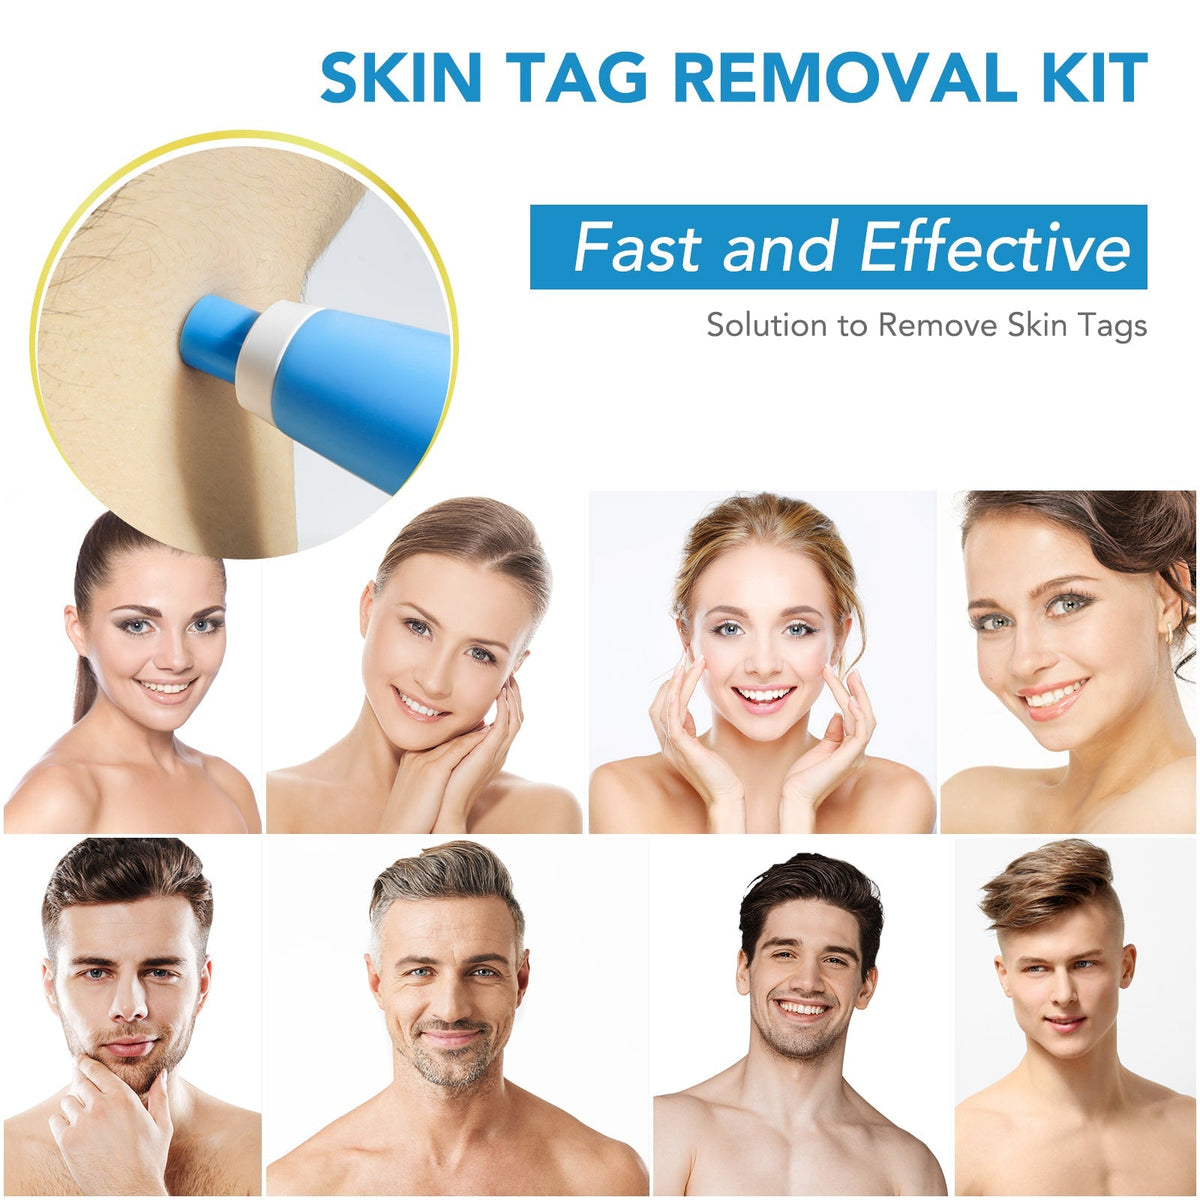 MicroCare Skin Solution - Advanced Skin Tag, Wart, Acne, and Pimple Removal Kit